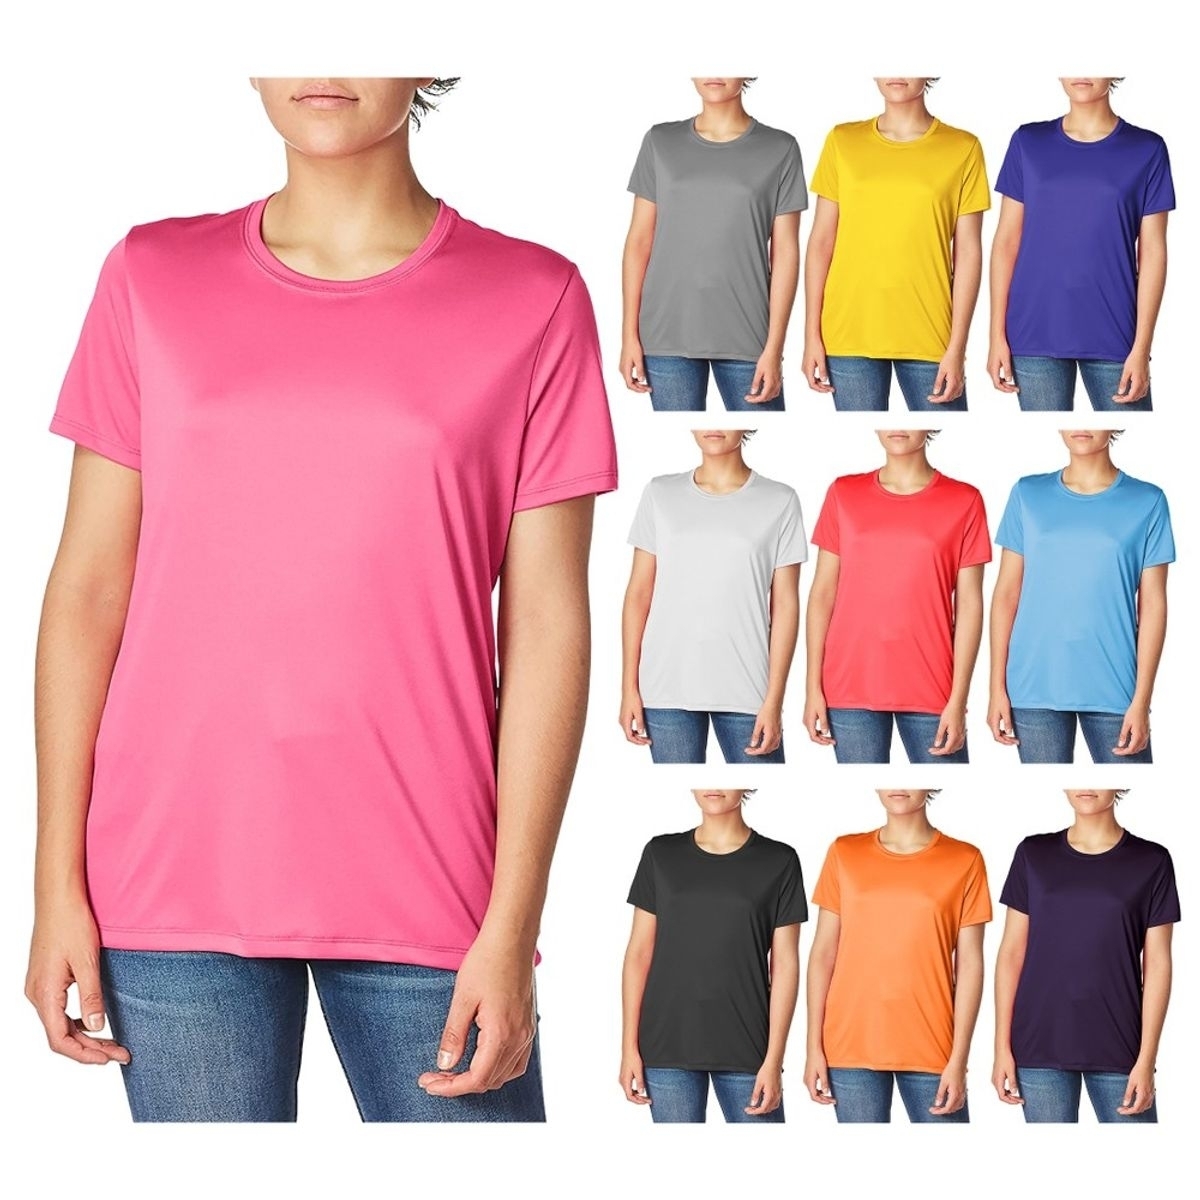 5-Pack: Women's Cool Dri-FIt Moisture Wicking Sim-Fit Long Sleeve Crew Neck T-Shirts - Large